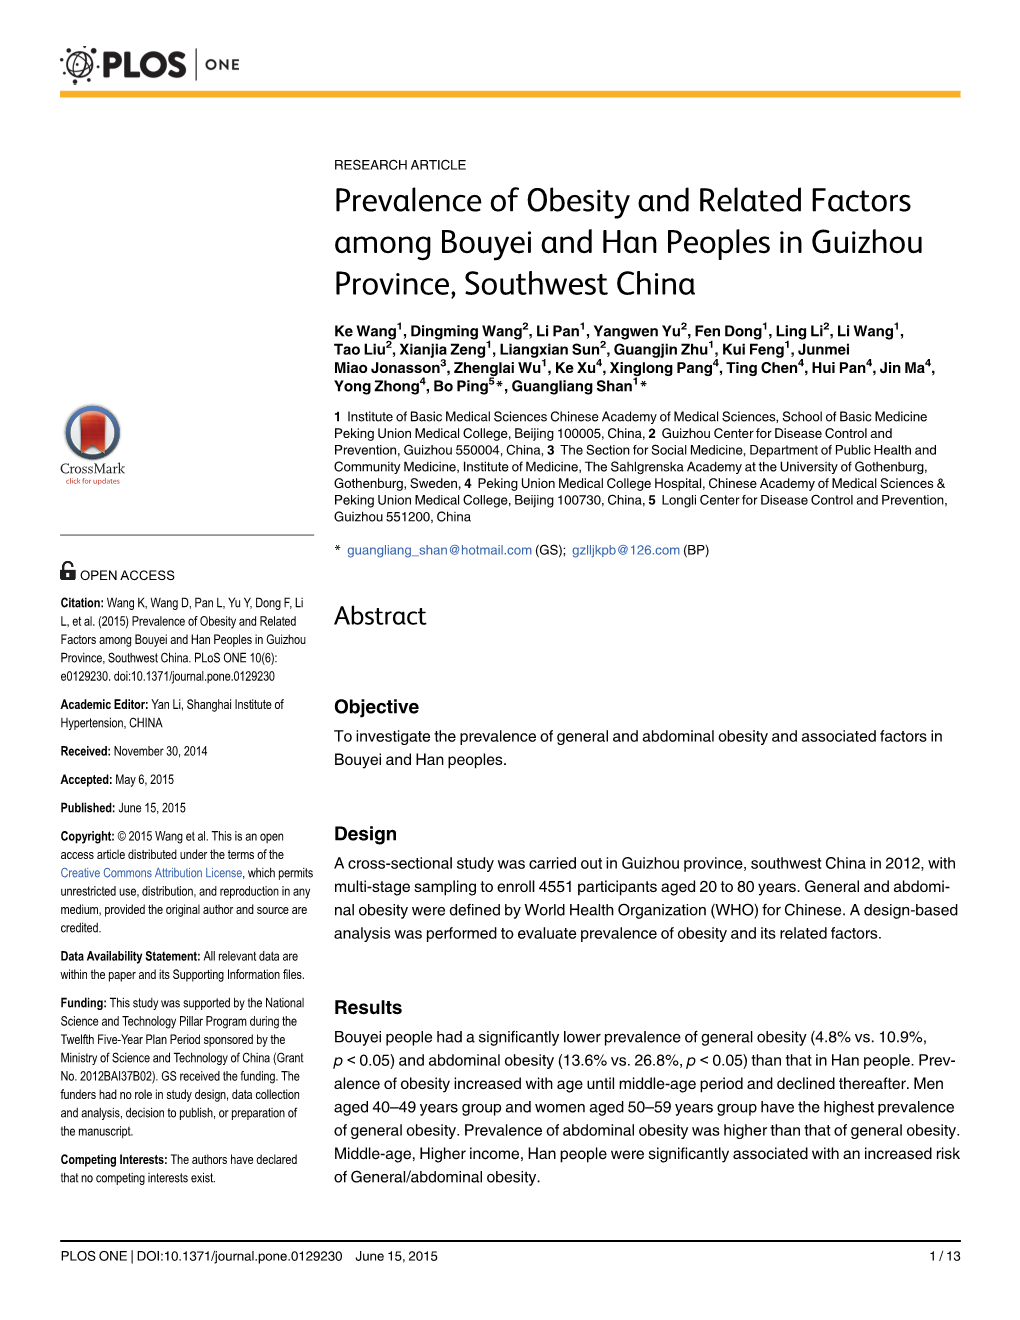 Prevalence of Obesity and Related Factors Among Bouyei and Han Peoples in Guizhou Province, Southwest China